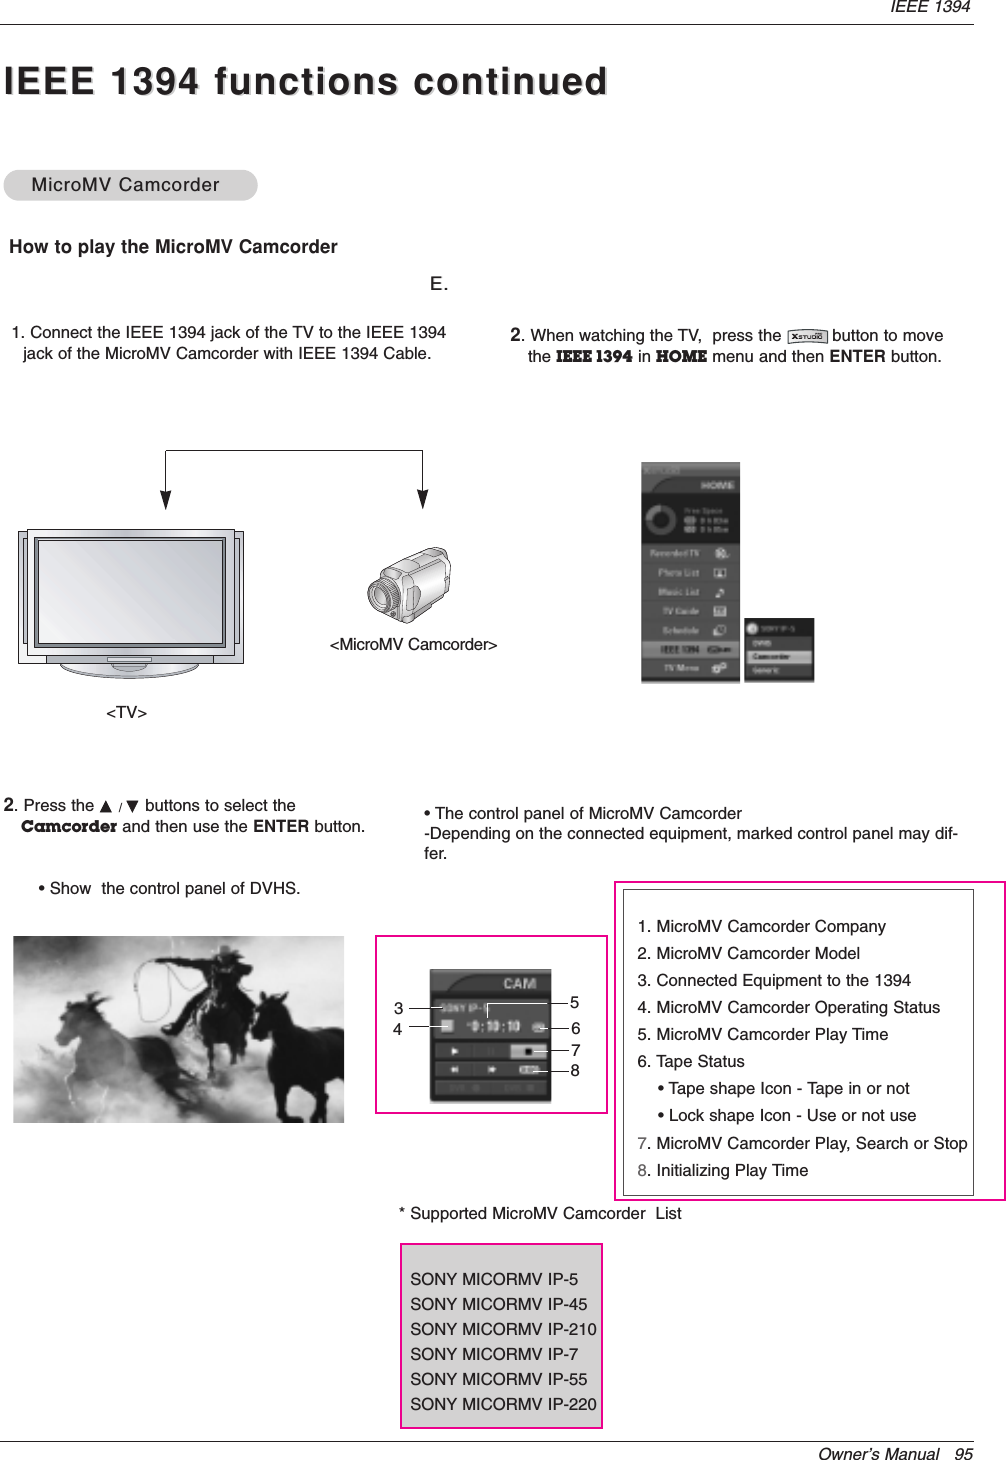 Owner’s Manual   95IEEE 1394IEEE 1394 functions continuedIEEE 1394 functions continuedHow to play the MicroMV CamcorderMicroMV CamcorderMicroMV Camcorder&lt;TV&gt;&lt;MicroMV Camcorder&gt;1. Connect the IEEE 1394 jack of the TV to the IEEE 1394jack of the MicroMV Camcorder with IEEE 1394 Cable.• The control panel of MicroMV Camcorder-Depending on the connected equipment, marked control panel may dif-fer.1. MicroMV Camcorder Company2. MicroMV Camcorder Model3. Connected Equipment to the 13944. MicroMV Camcorder Operating Status5. MicroMV Camcorder Play Time6. Tape Status• Tape shape Icon - Tape in or not • Lock shape Icon - Use or not use7. MicroMV Camcorder Play, Search or Stop8. Initializing Play Time* Supported MicroMV Camcorder  ListSONY MICORMV IP-5SONY MICORMV IP-45SONY MICORMV IP-210SONY MICORMV IP-7SONY MICORMV IP-55SONY MICORMV IP-2202. When watching the TV,  press the          button to movethe IEEE 1394 in HOME menu and then ENTER button.2. Press the D / Ebuttons to select theCamcorder and then use the ENTER button.• Show  the control panel of DVHS.346578E.E.